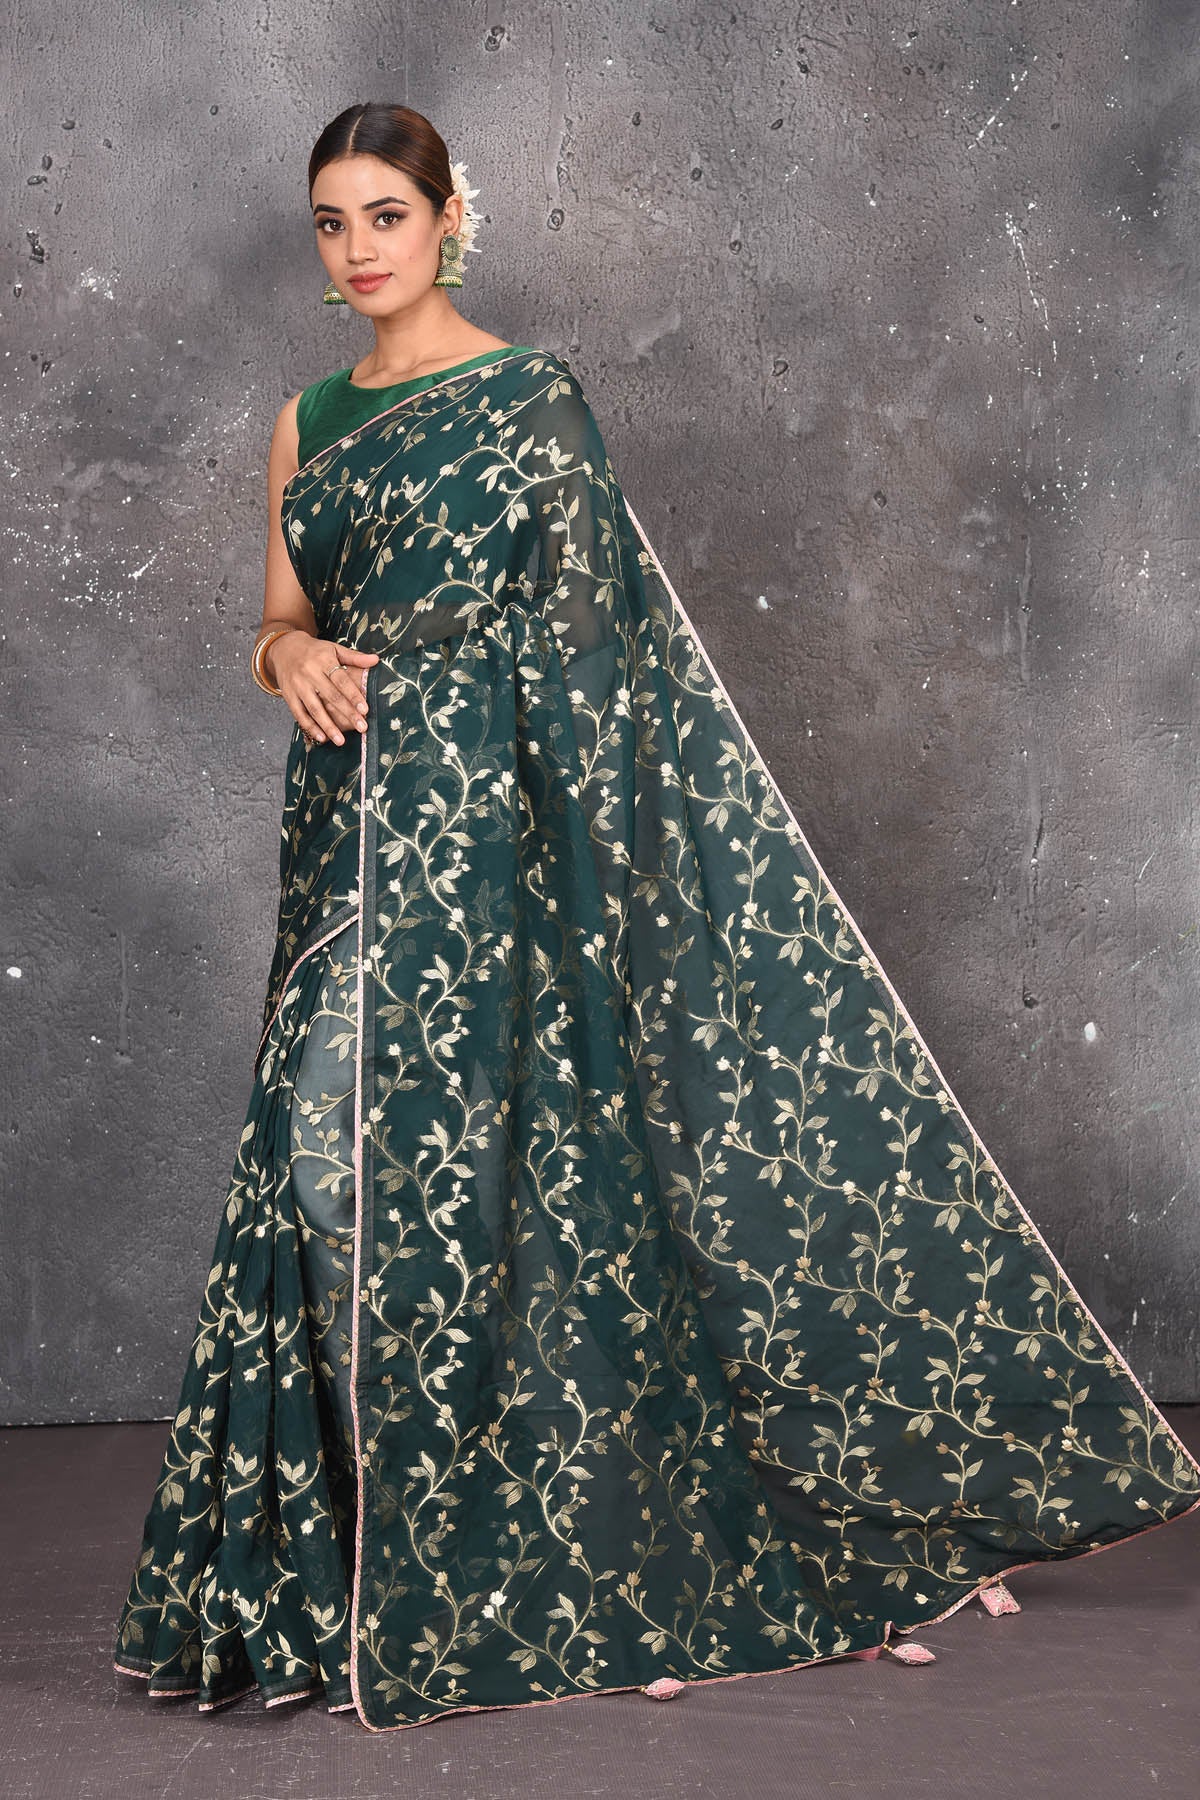 Buy exquisite dark green kora silk designer saree with floral jaal print online in USA. Pure kora sarees by Pure Elegance in green color. It has a beautiful floral jaal print all over. This kora brings the charm and simplicity of this saree with border and pallu. Shop this designer silk sari from Pure Elegance Indian fashion store in USA.-Full view with folded hands.